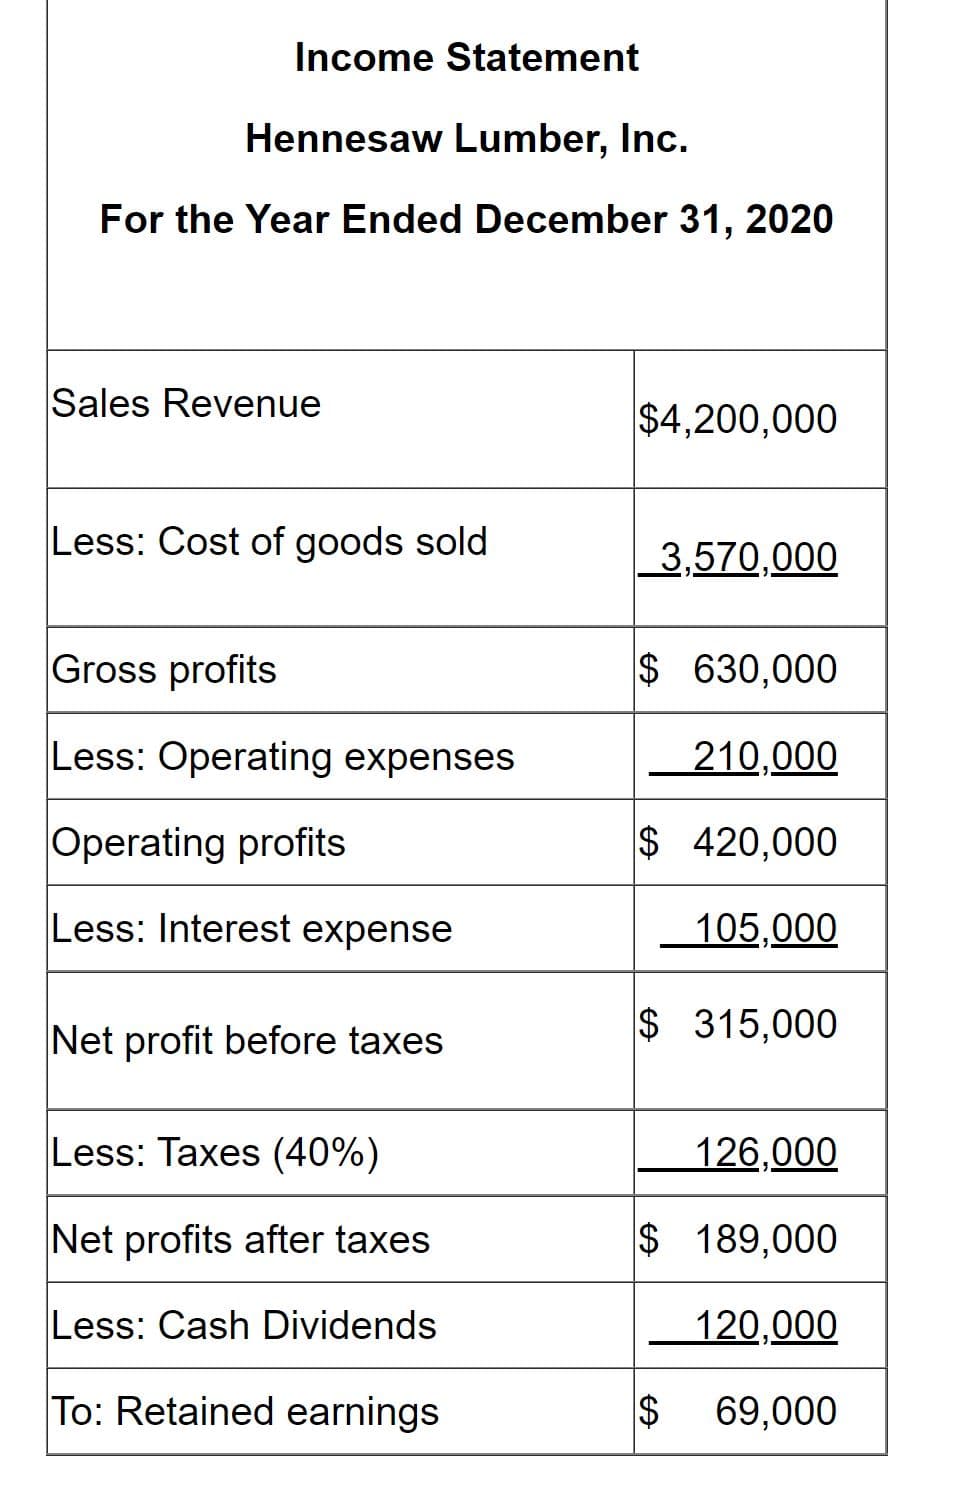 Income Statement
Hennesaw Lumber, Inc.
For the Year Ended December 31, 2020
Sales Revenue
$4,200,000
Less: Cost of goods sold
3,570,000
Gross profits
$ 630,000
Less: Operating expenses
210,000
Operating profits
$ 420,000
Less: Interest expense
105,000
Net profit before taxes
$ 315,000
Less: Taxes (40%)
126,000
Net profits after taxes
$ 189,000
Less: Cash Dividends
120,000
To: Retained earnings
2$
69,000
%24
